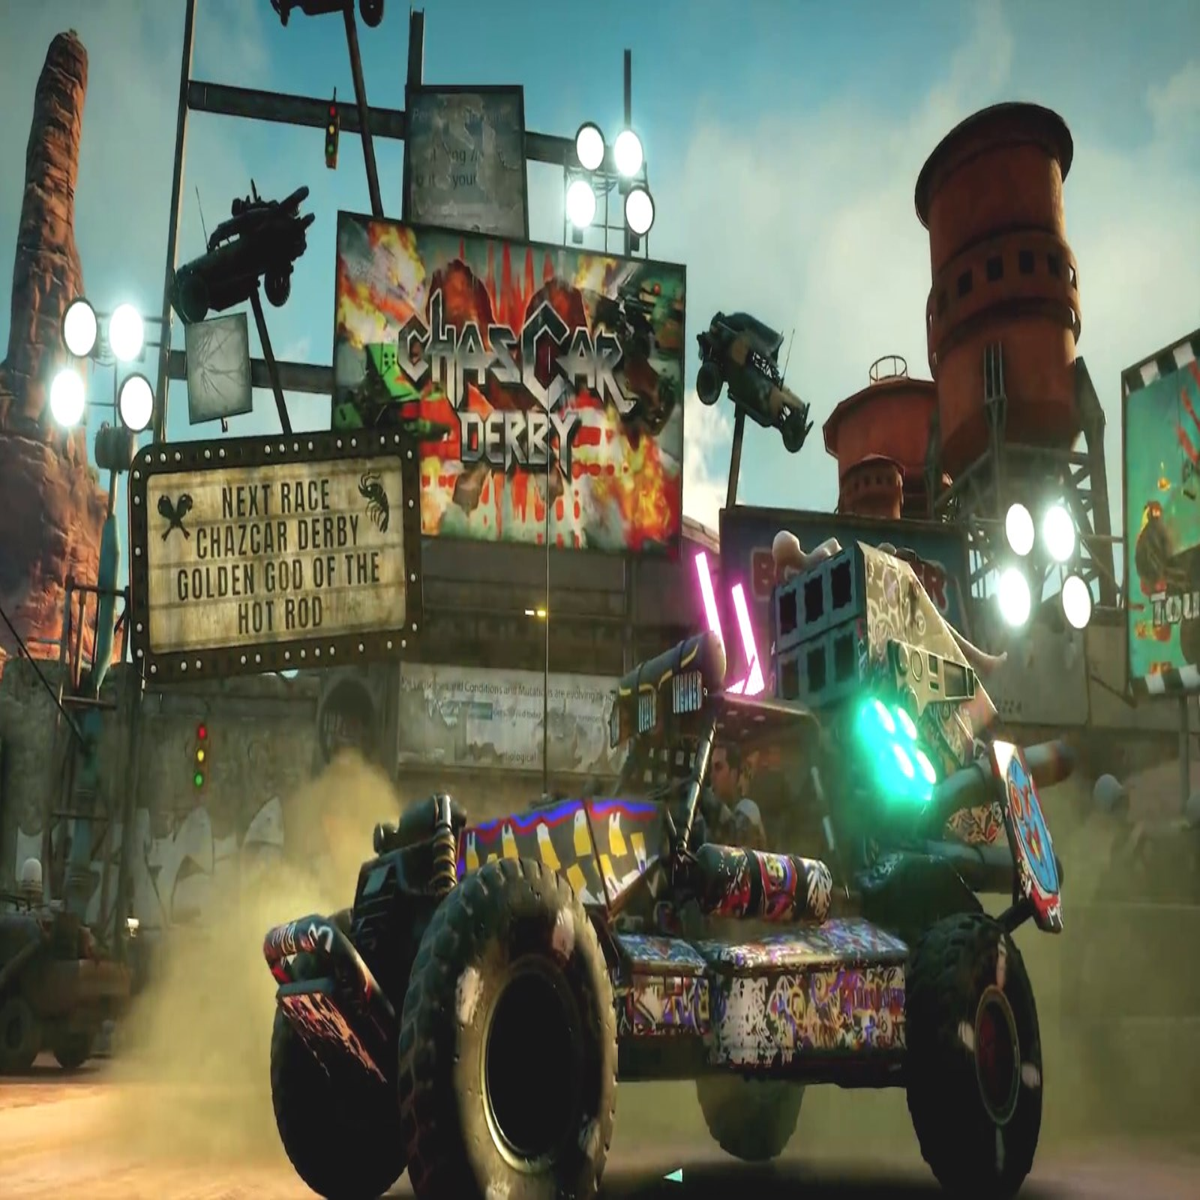 RAGE 2 Guide – All Cheat Codes and Wizard Wasteland Locations